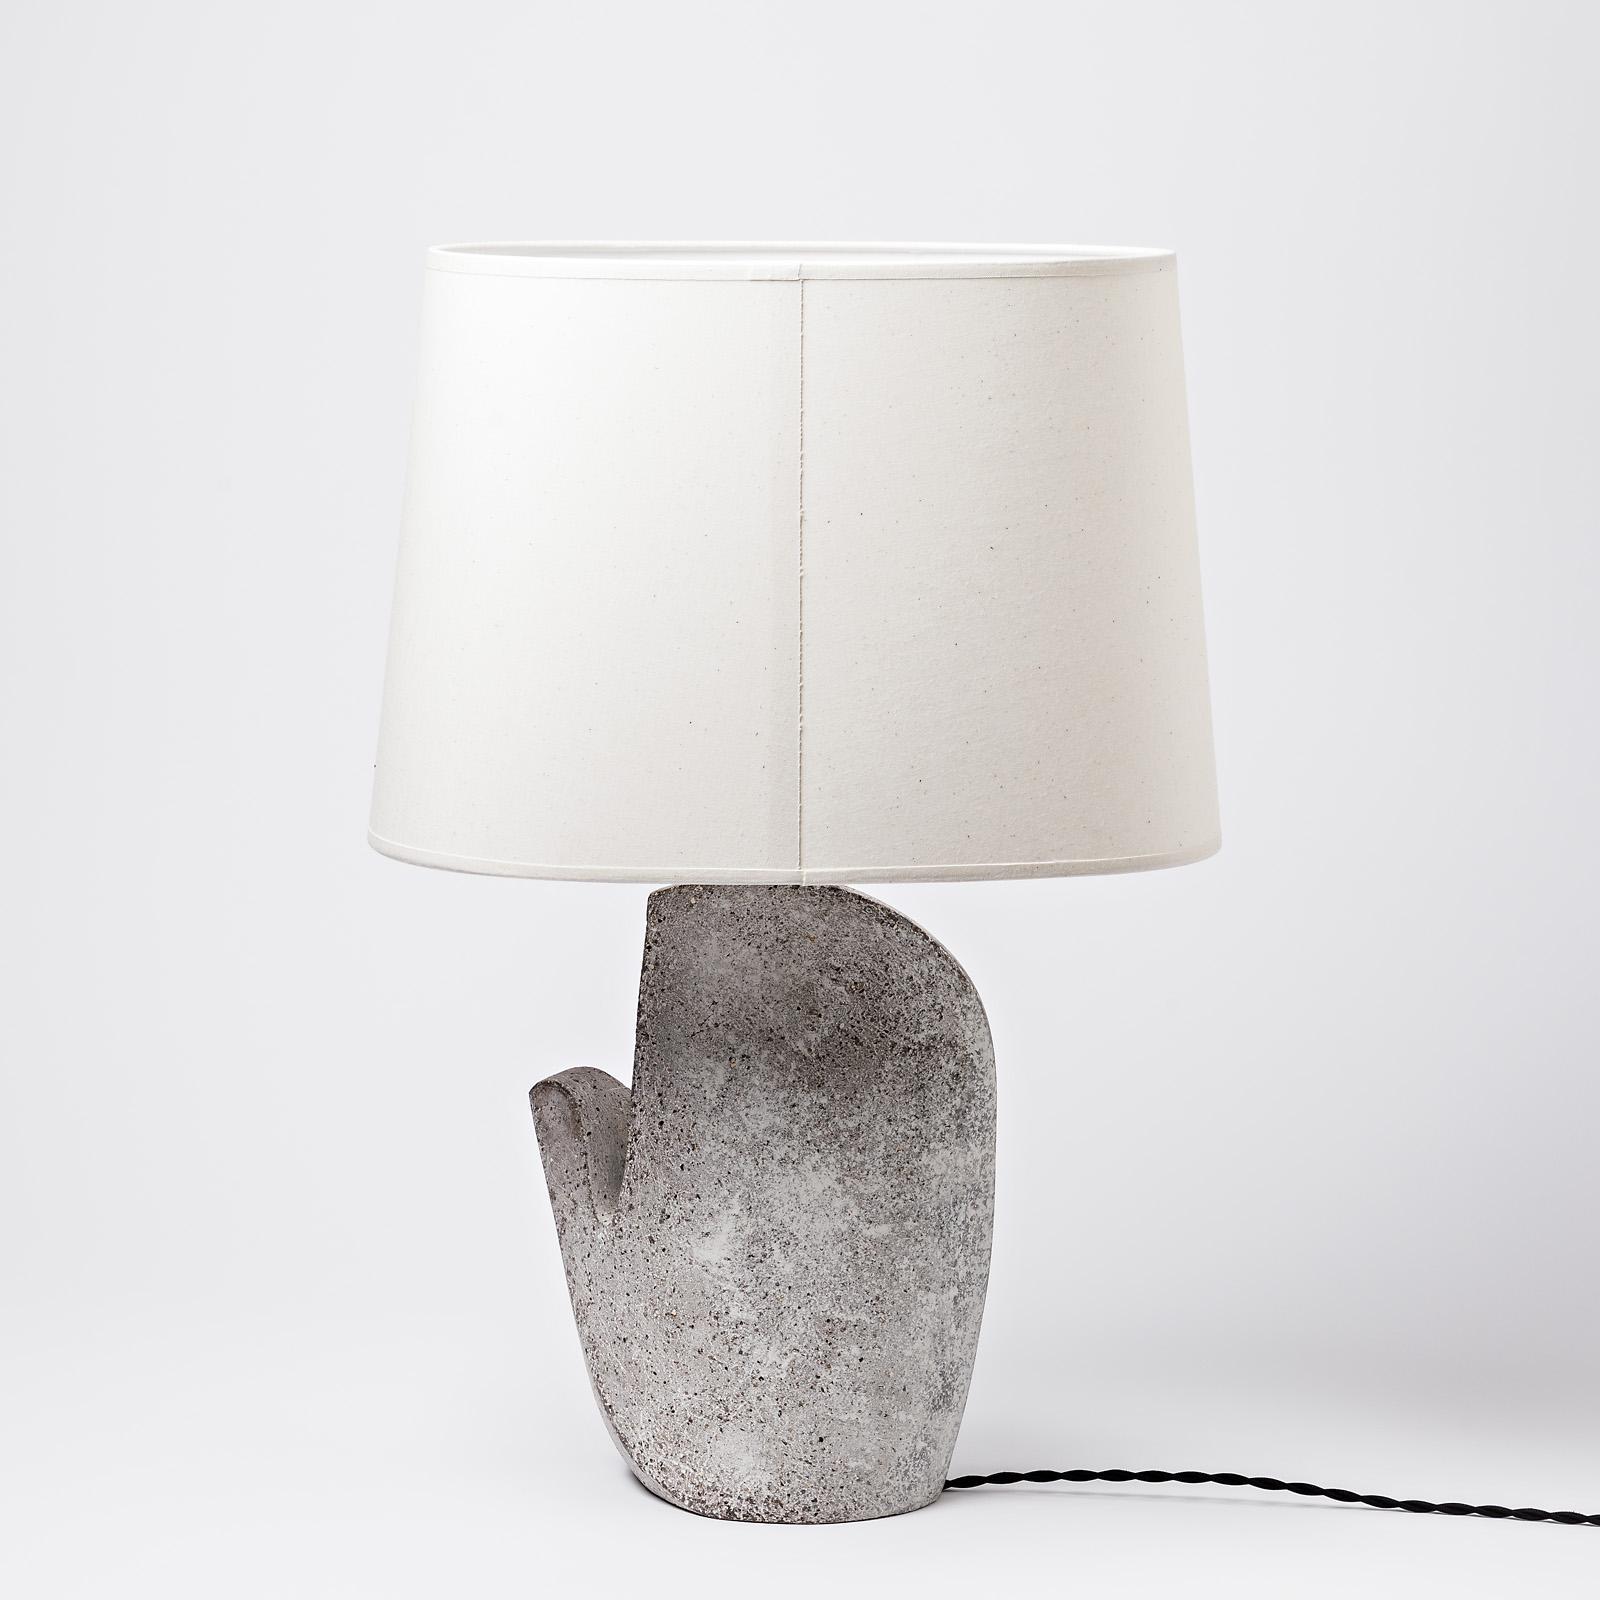 French Ceramic Table Lamp by Maarten Stuer, circa 2021